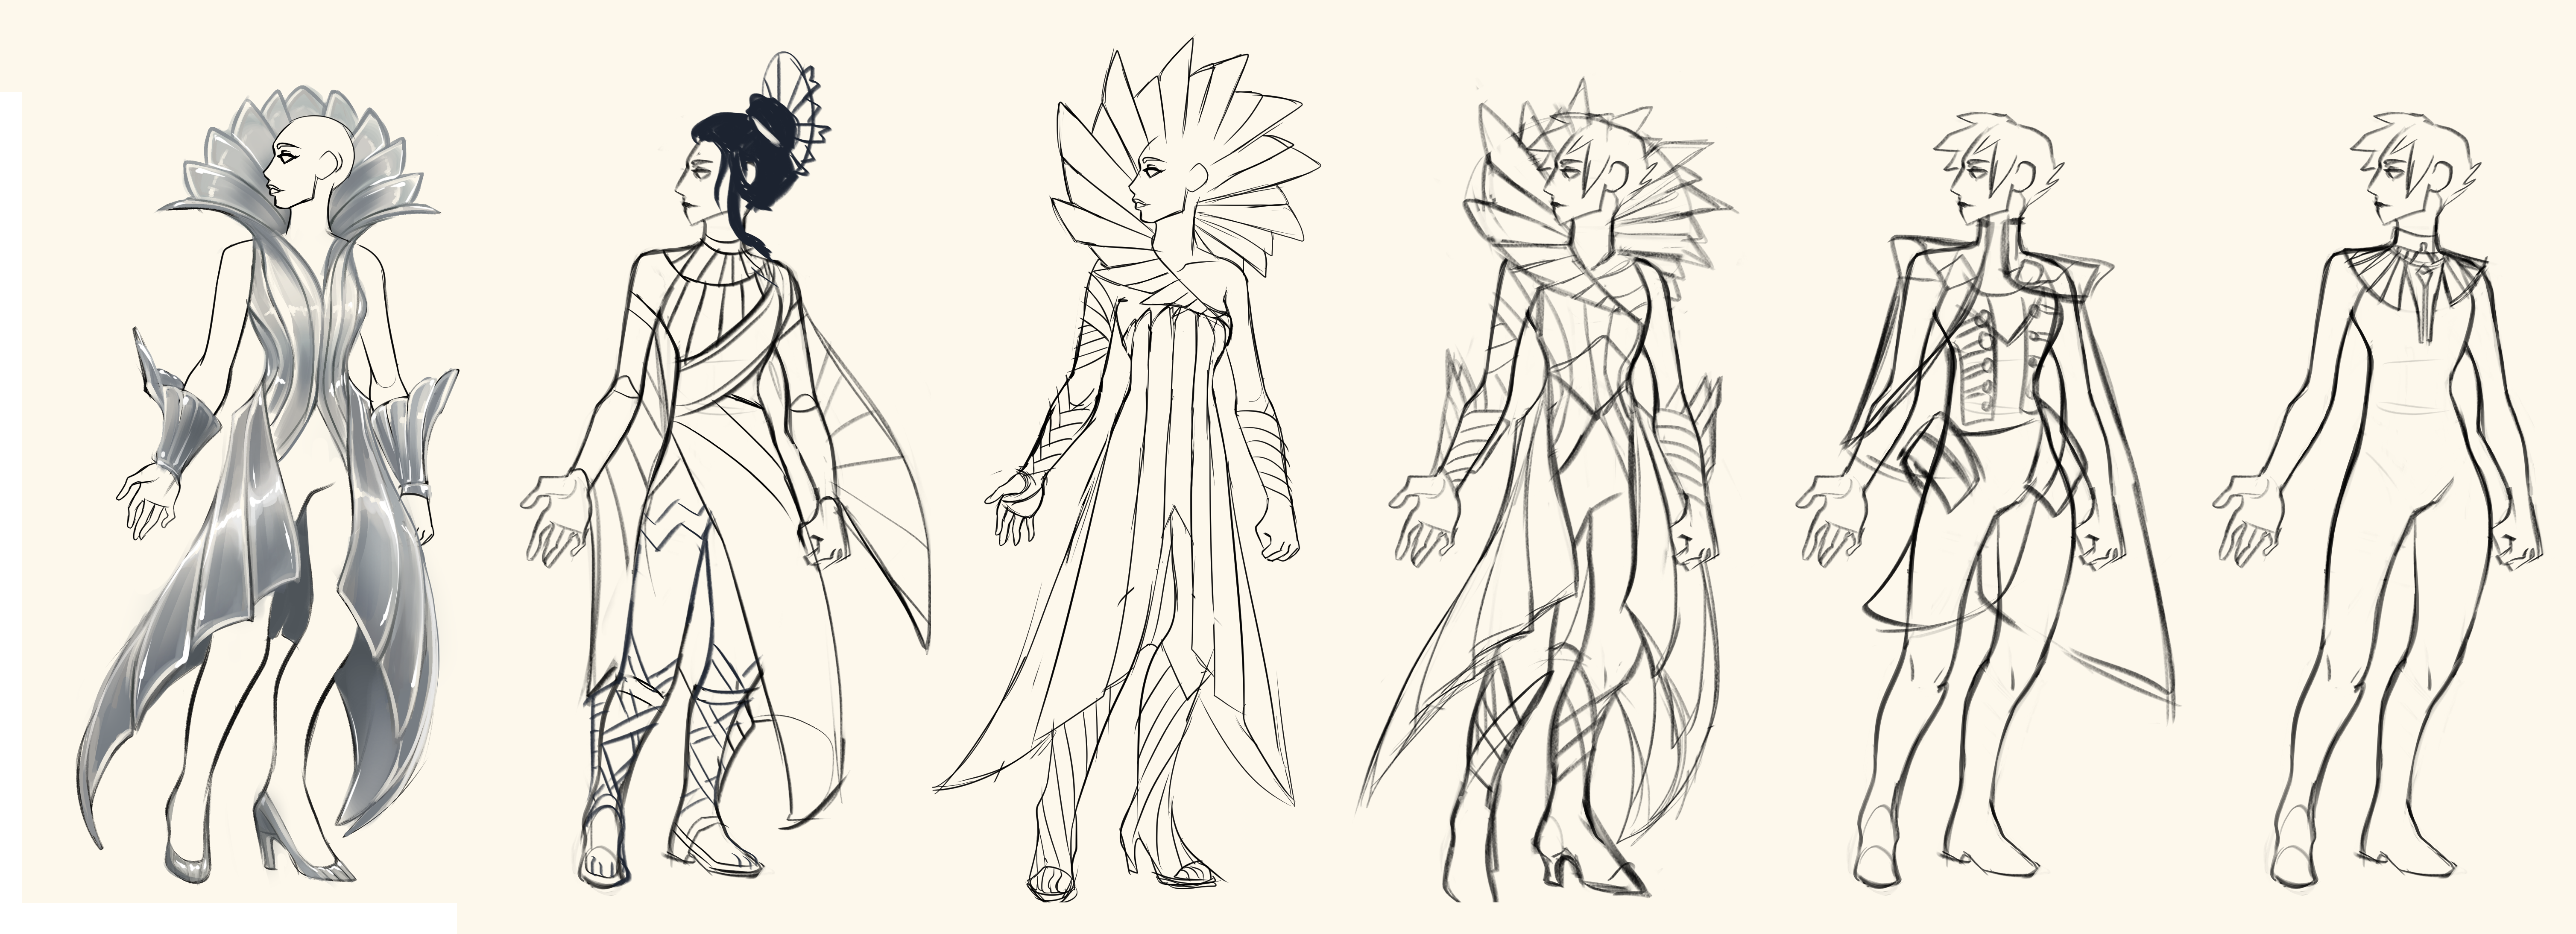 Incorporating wings and halos into the outfit designs.